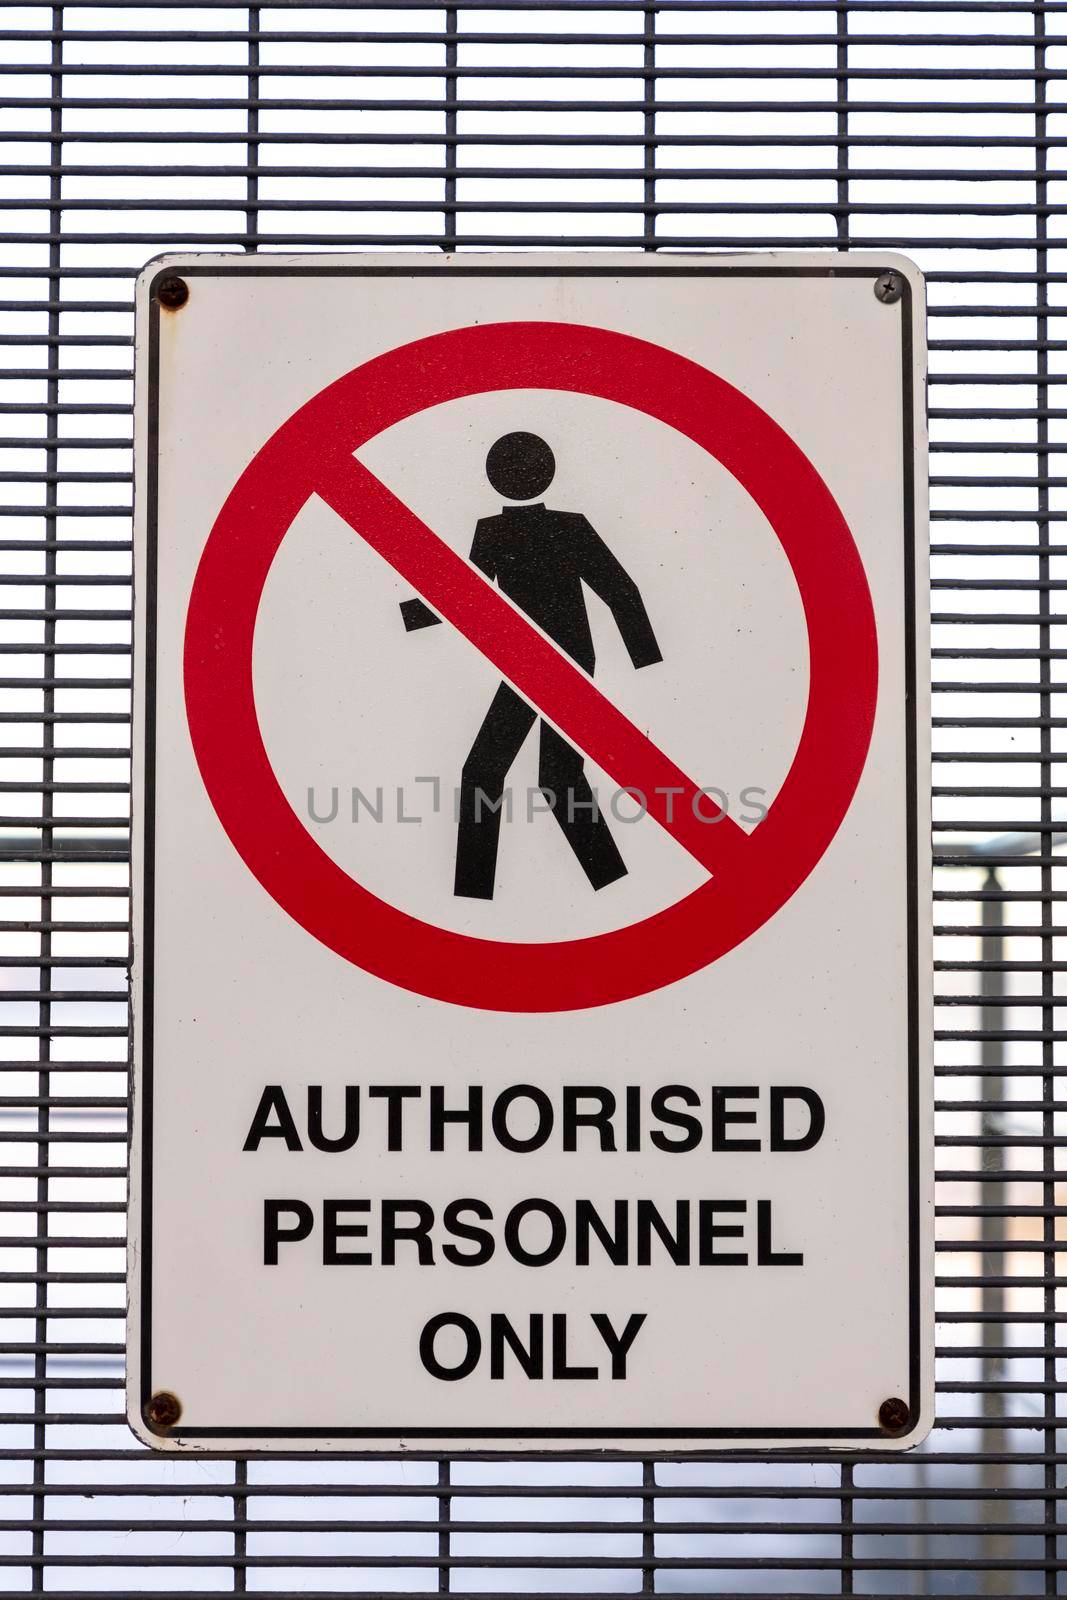 An authorised personnel only safety sign on a mesh metal gate on a stairwell